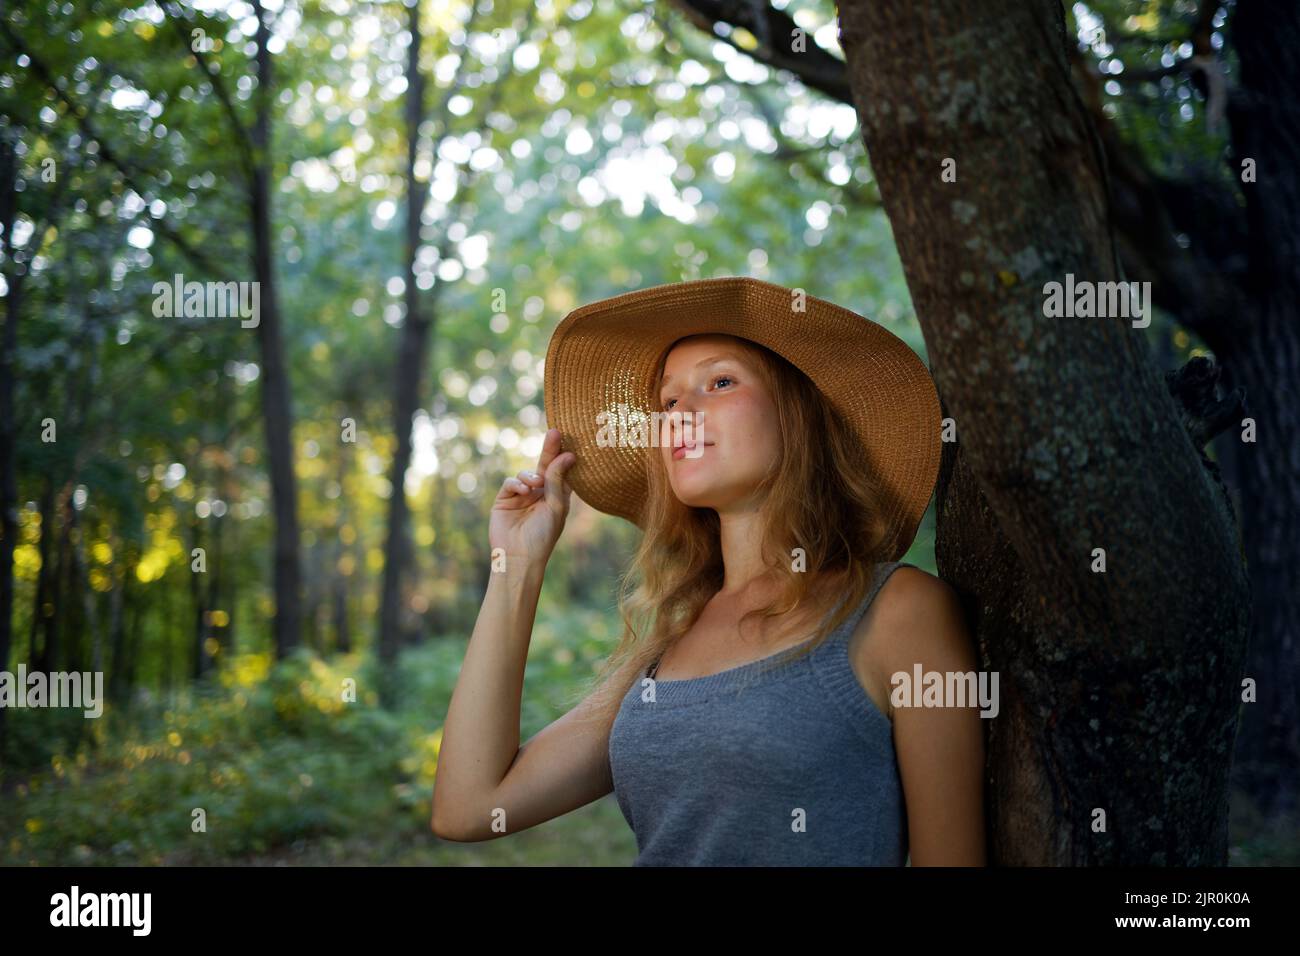 Closeup portrait of a young longhair girl in a straw hat who walks in the park or forest. Blurred nature background. Stock Photo